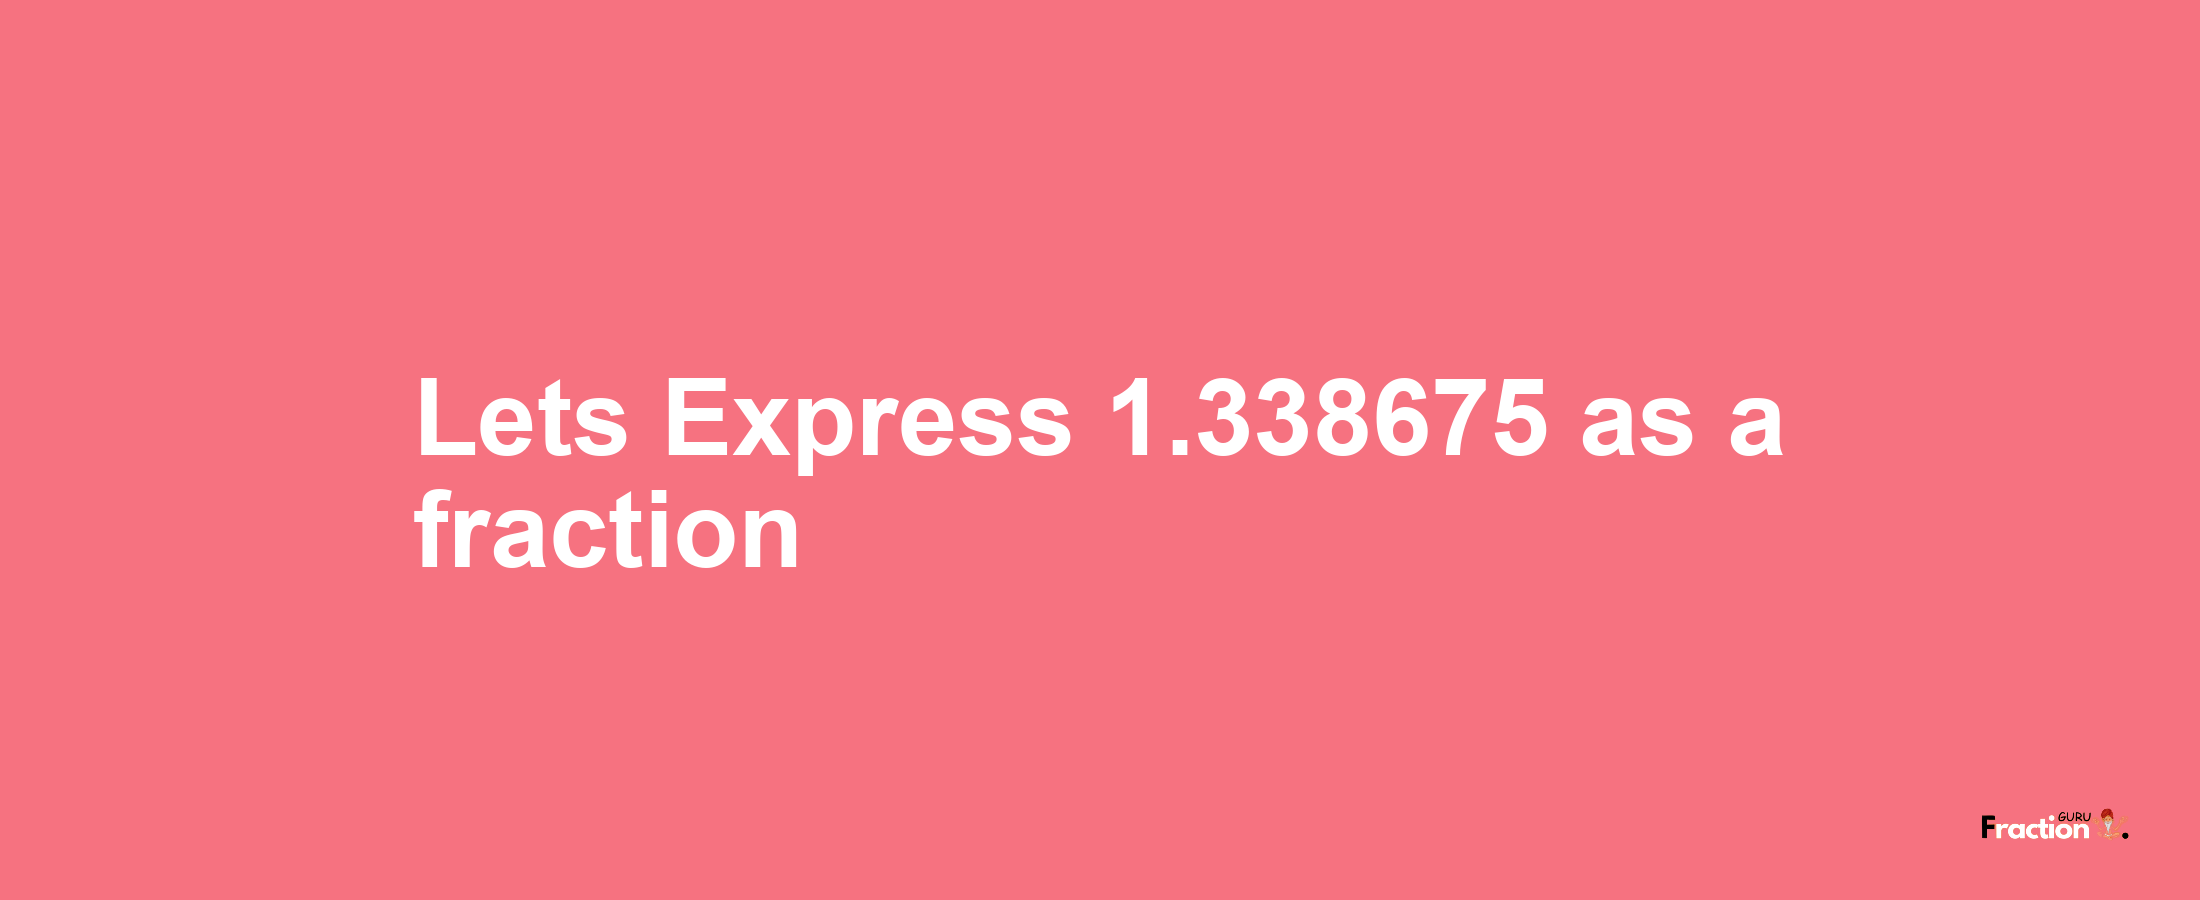 Lets Express 1.338675 as afraction